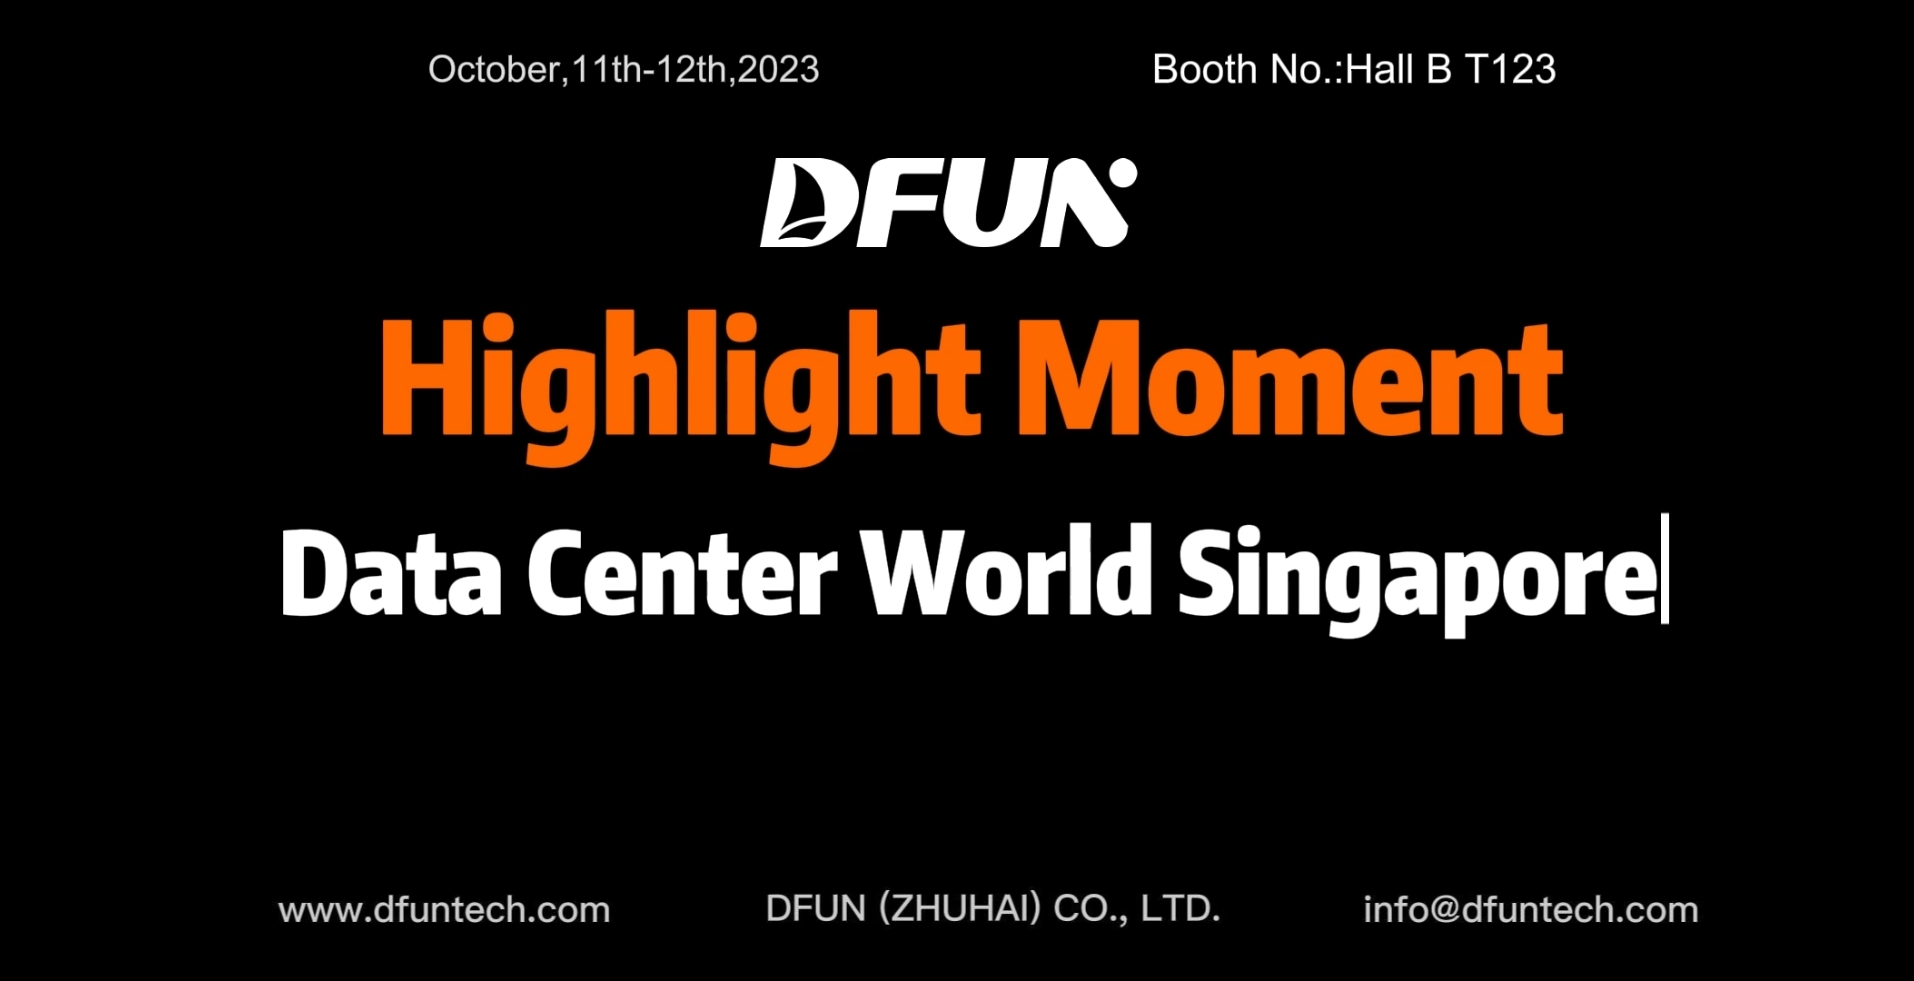 DFUN has attended Data Center World Singapore 2023